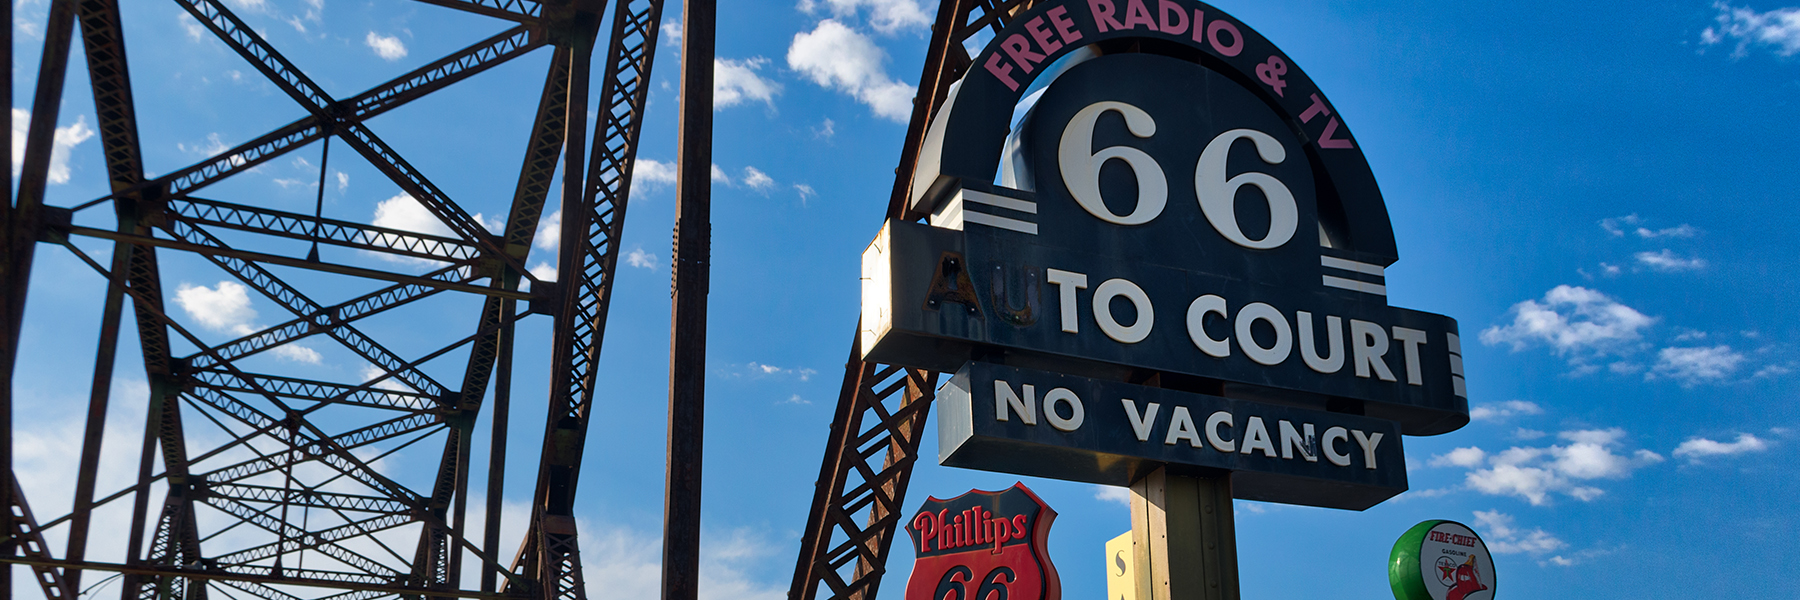 An Itinerary for Cruising Route 66 St Louis